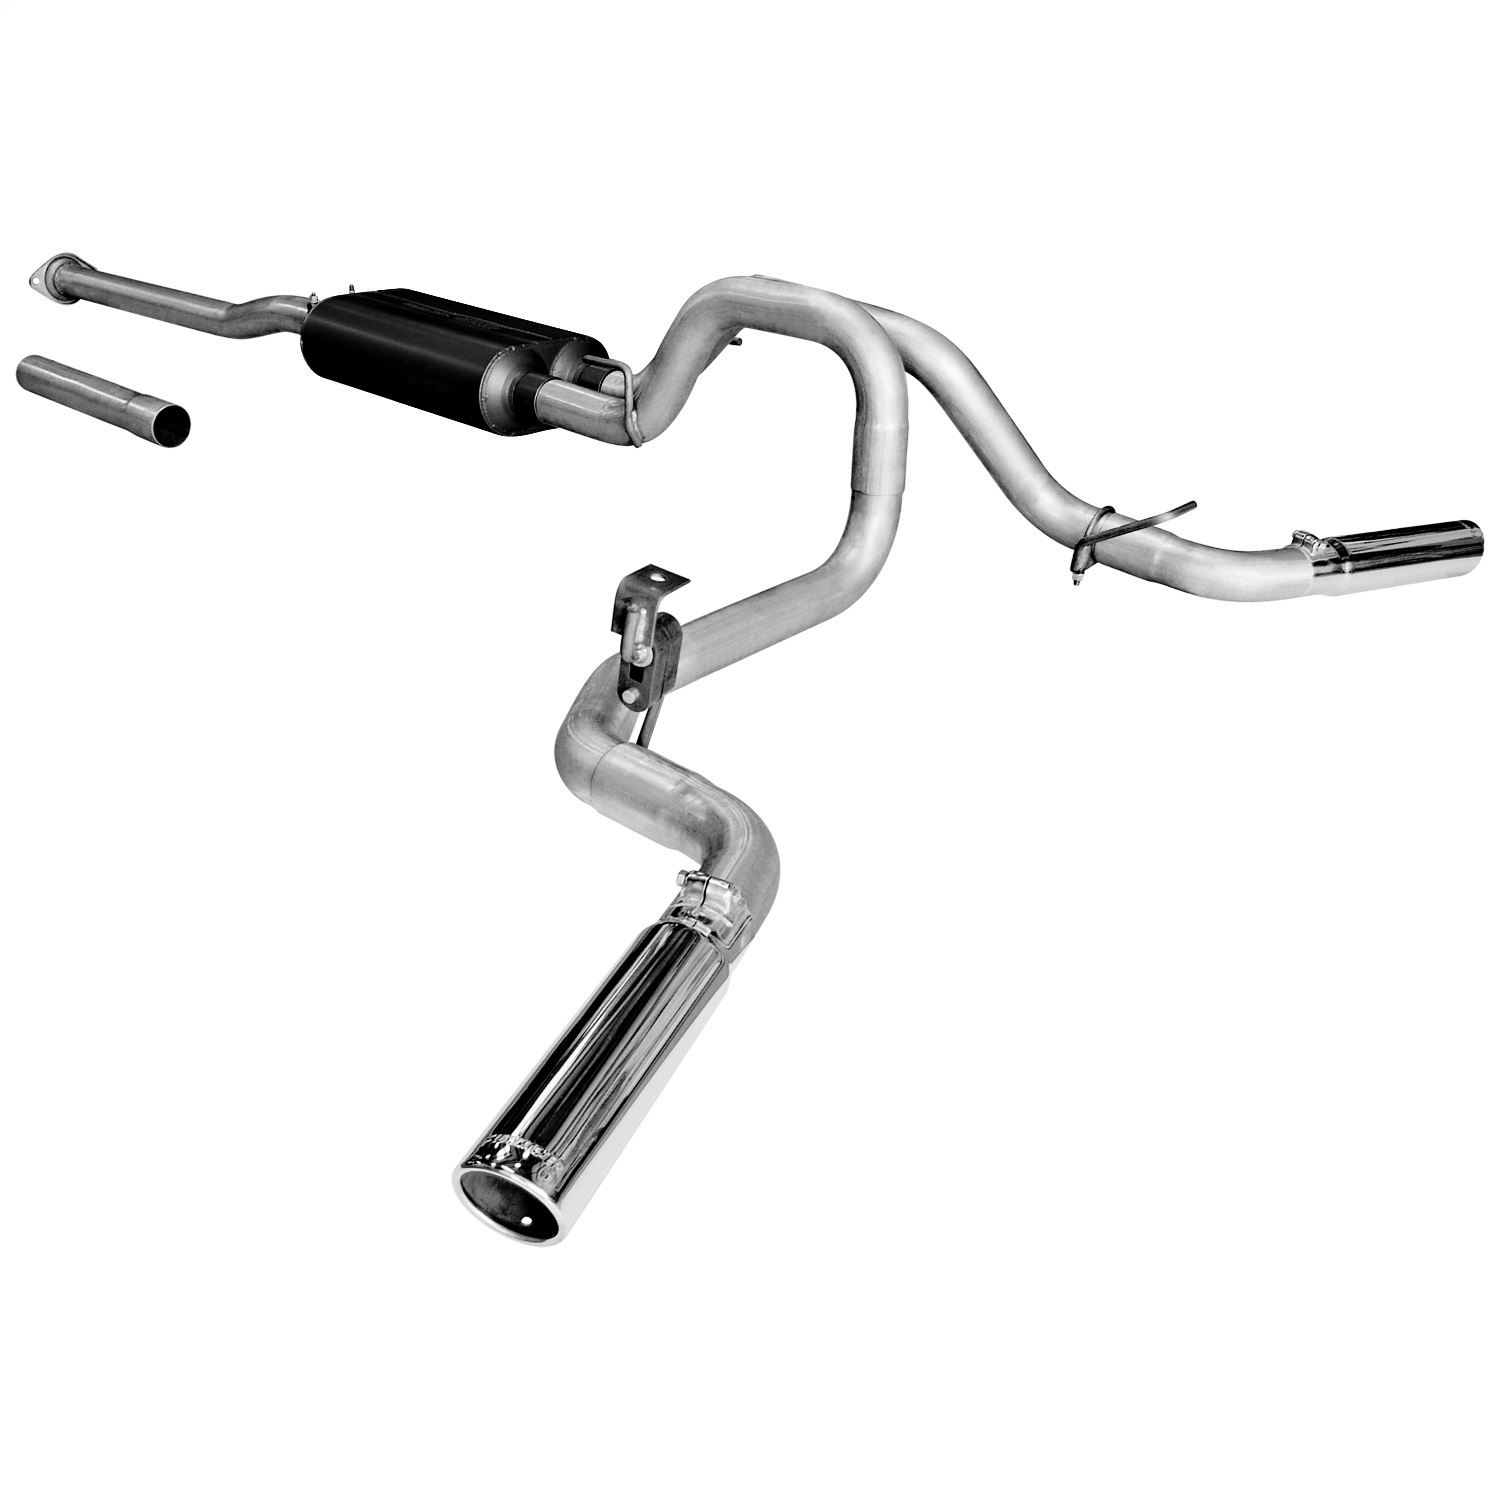 Flowmaster Flowmaster 17432 American Thunder Cat Back Exhaust System Fits 05-13 Tacoma